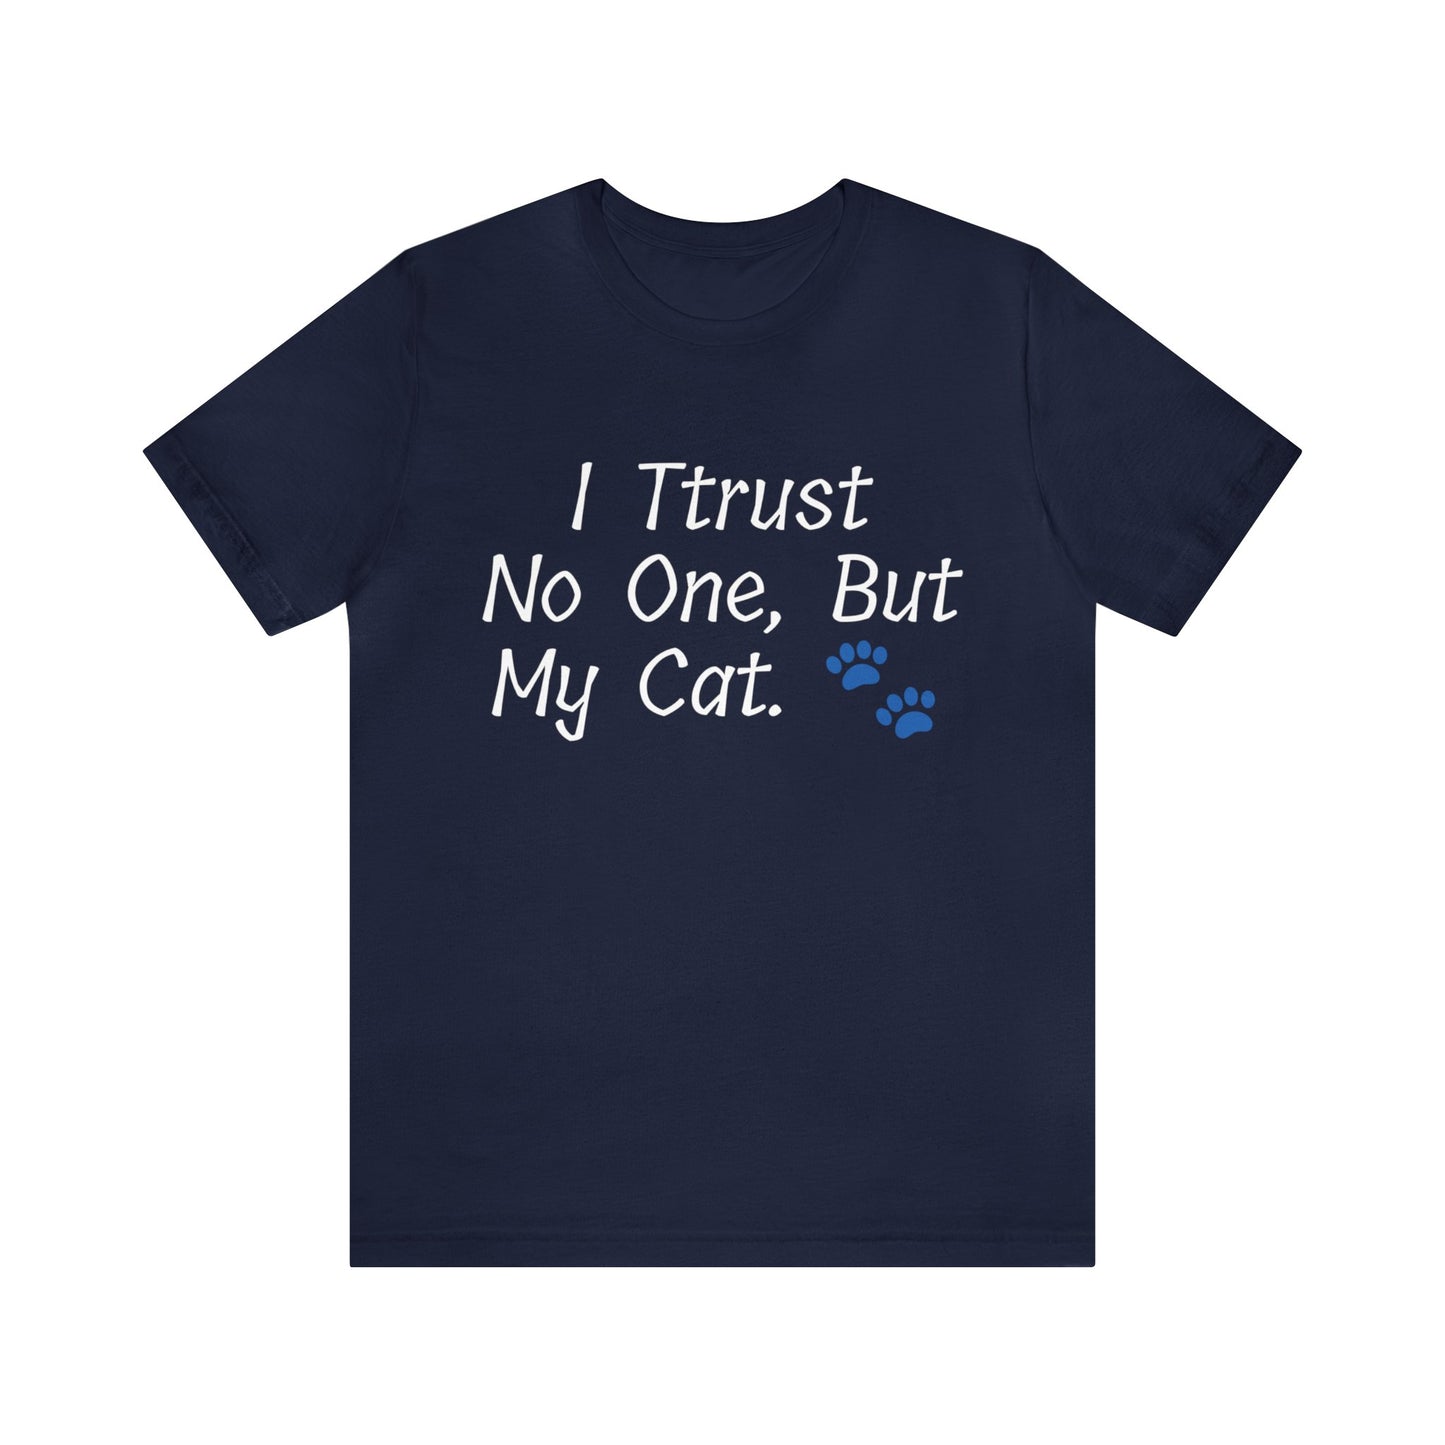 Navy T-Shirt Tshirt Design Gift for Friend and Family Short Sleeved Shirt For Cat Lovers Gift Petrova Designs